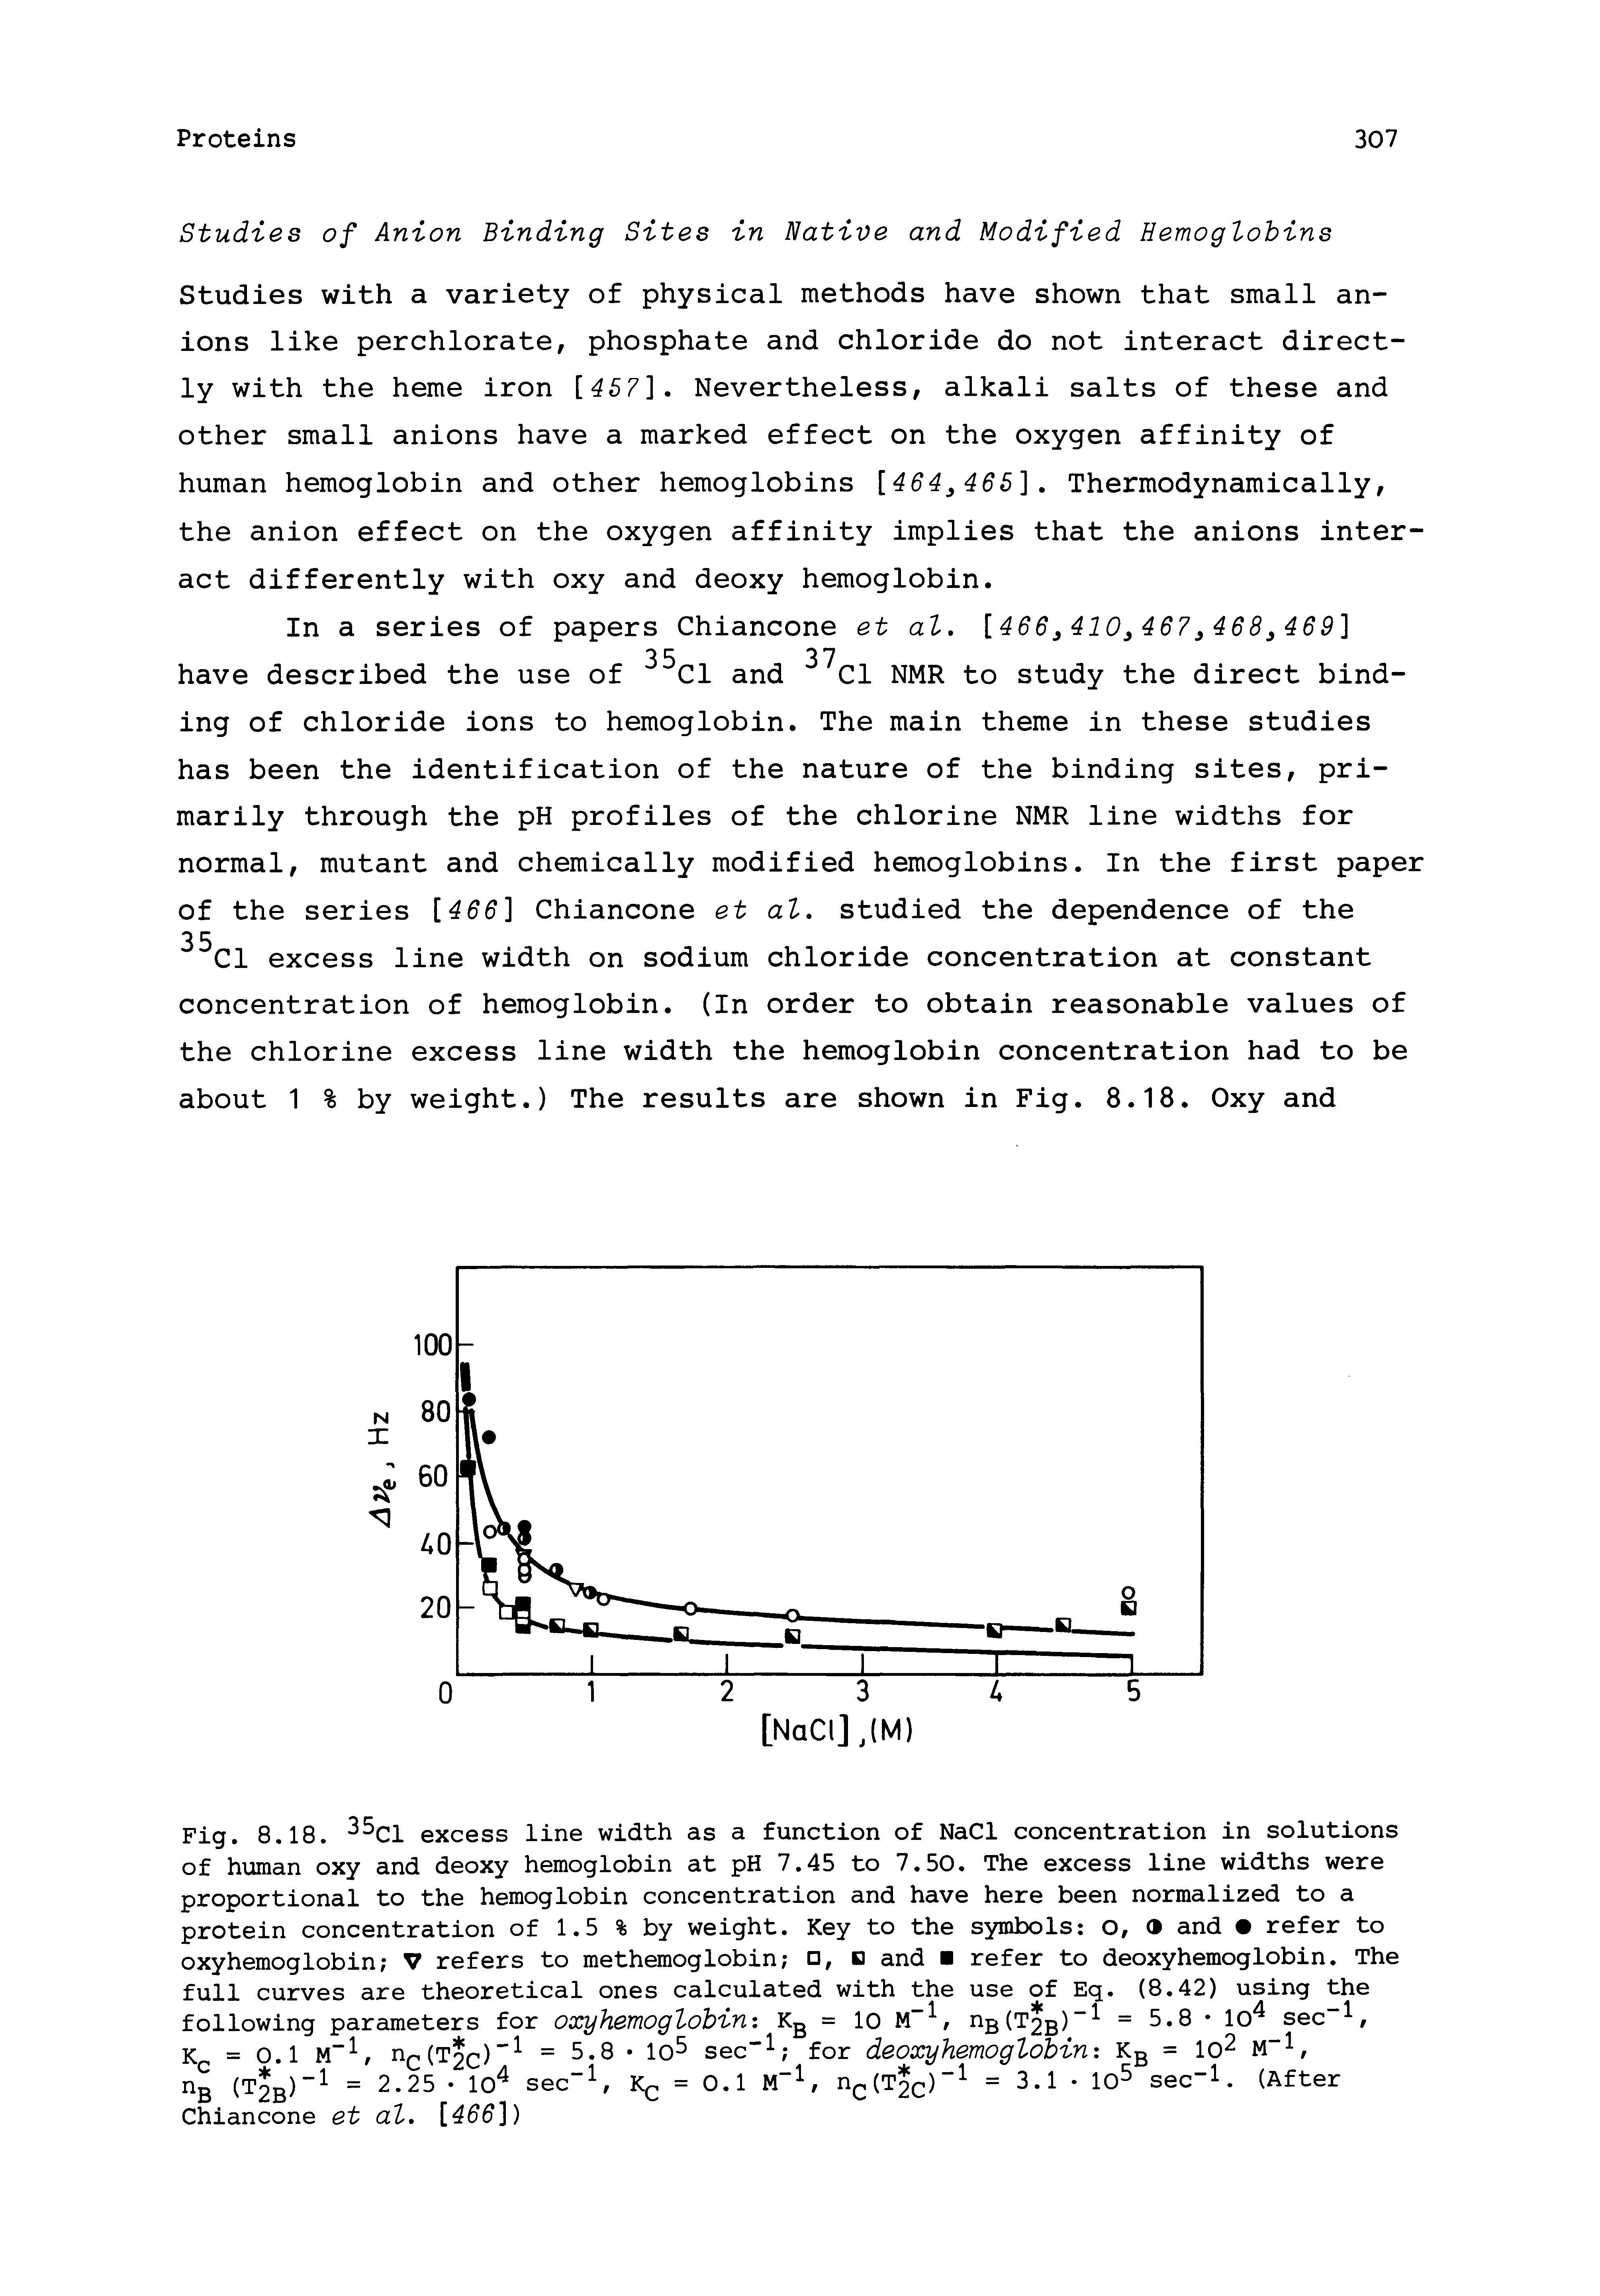 Fig. 8.18. Cl excess line width as a function of NaCl concentration in solutions of human oxy and deoxy hemoglobin at pH 7.45 to 7.50. The excess line widths were proportional to the hemoglobin concentration and have here been normalized to a protein concentration of 1,5 % by weight. Key to the symbols o, (i and refer to oxyhemoglobin V refers to methemoglobin , D and refer to deoxyhemoglobin. The full curves are theoretical ones calculated with the use of Eq. (8.42) using the following parameters for oxyhemoglobin Kg = 10 M , ngCT B)" = 5.8 10 sec , ...